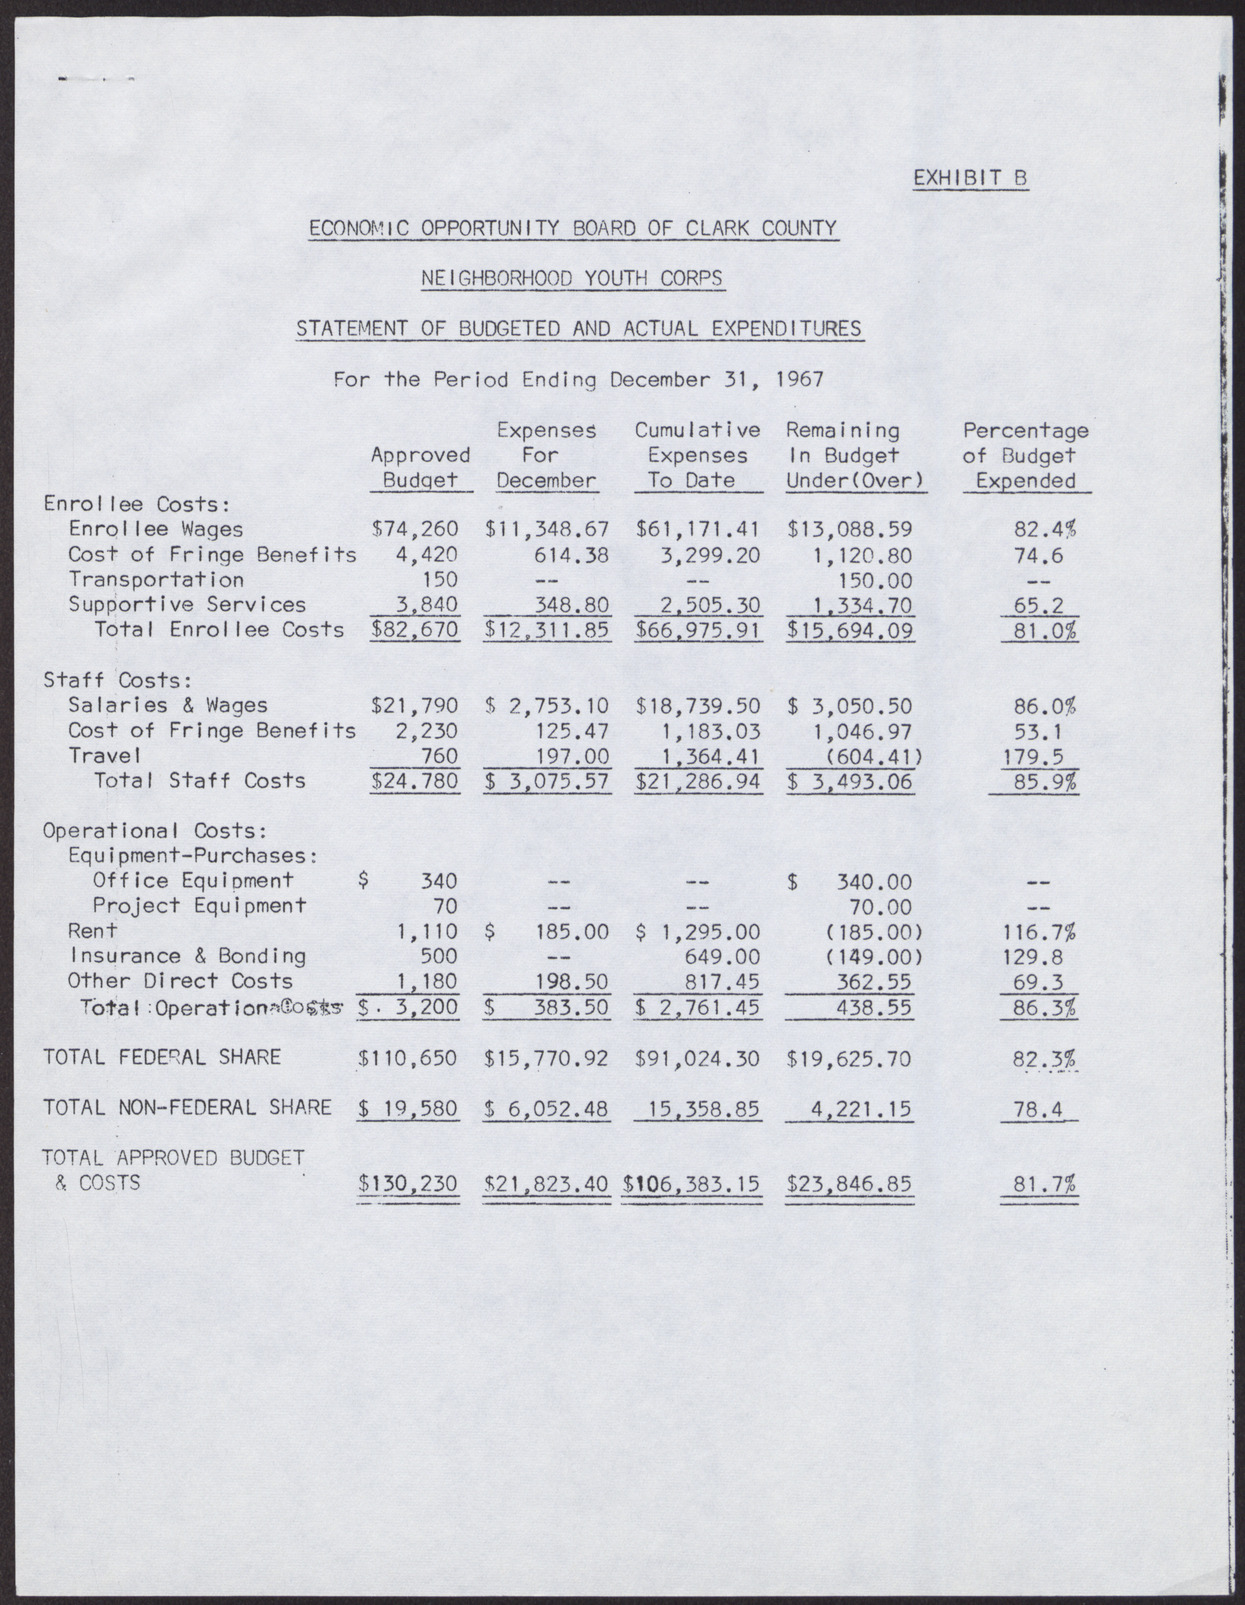 Economic Opportunity Board of Clark County Neighborhood Youth Corps Financial Position, Statement of Budgeted and Actual Expenditures, and Schedule of Checks Written (3 pages), December 1967, page 2